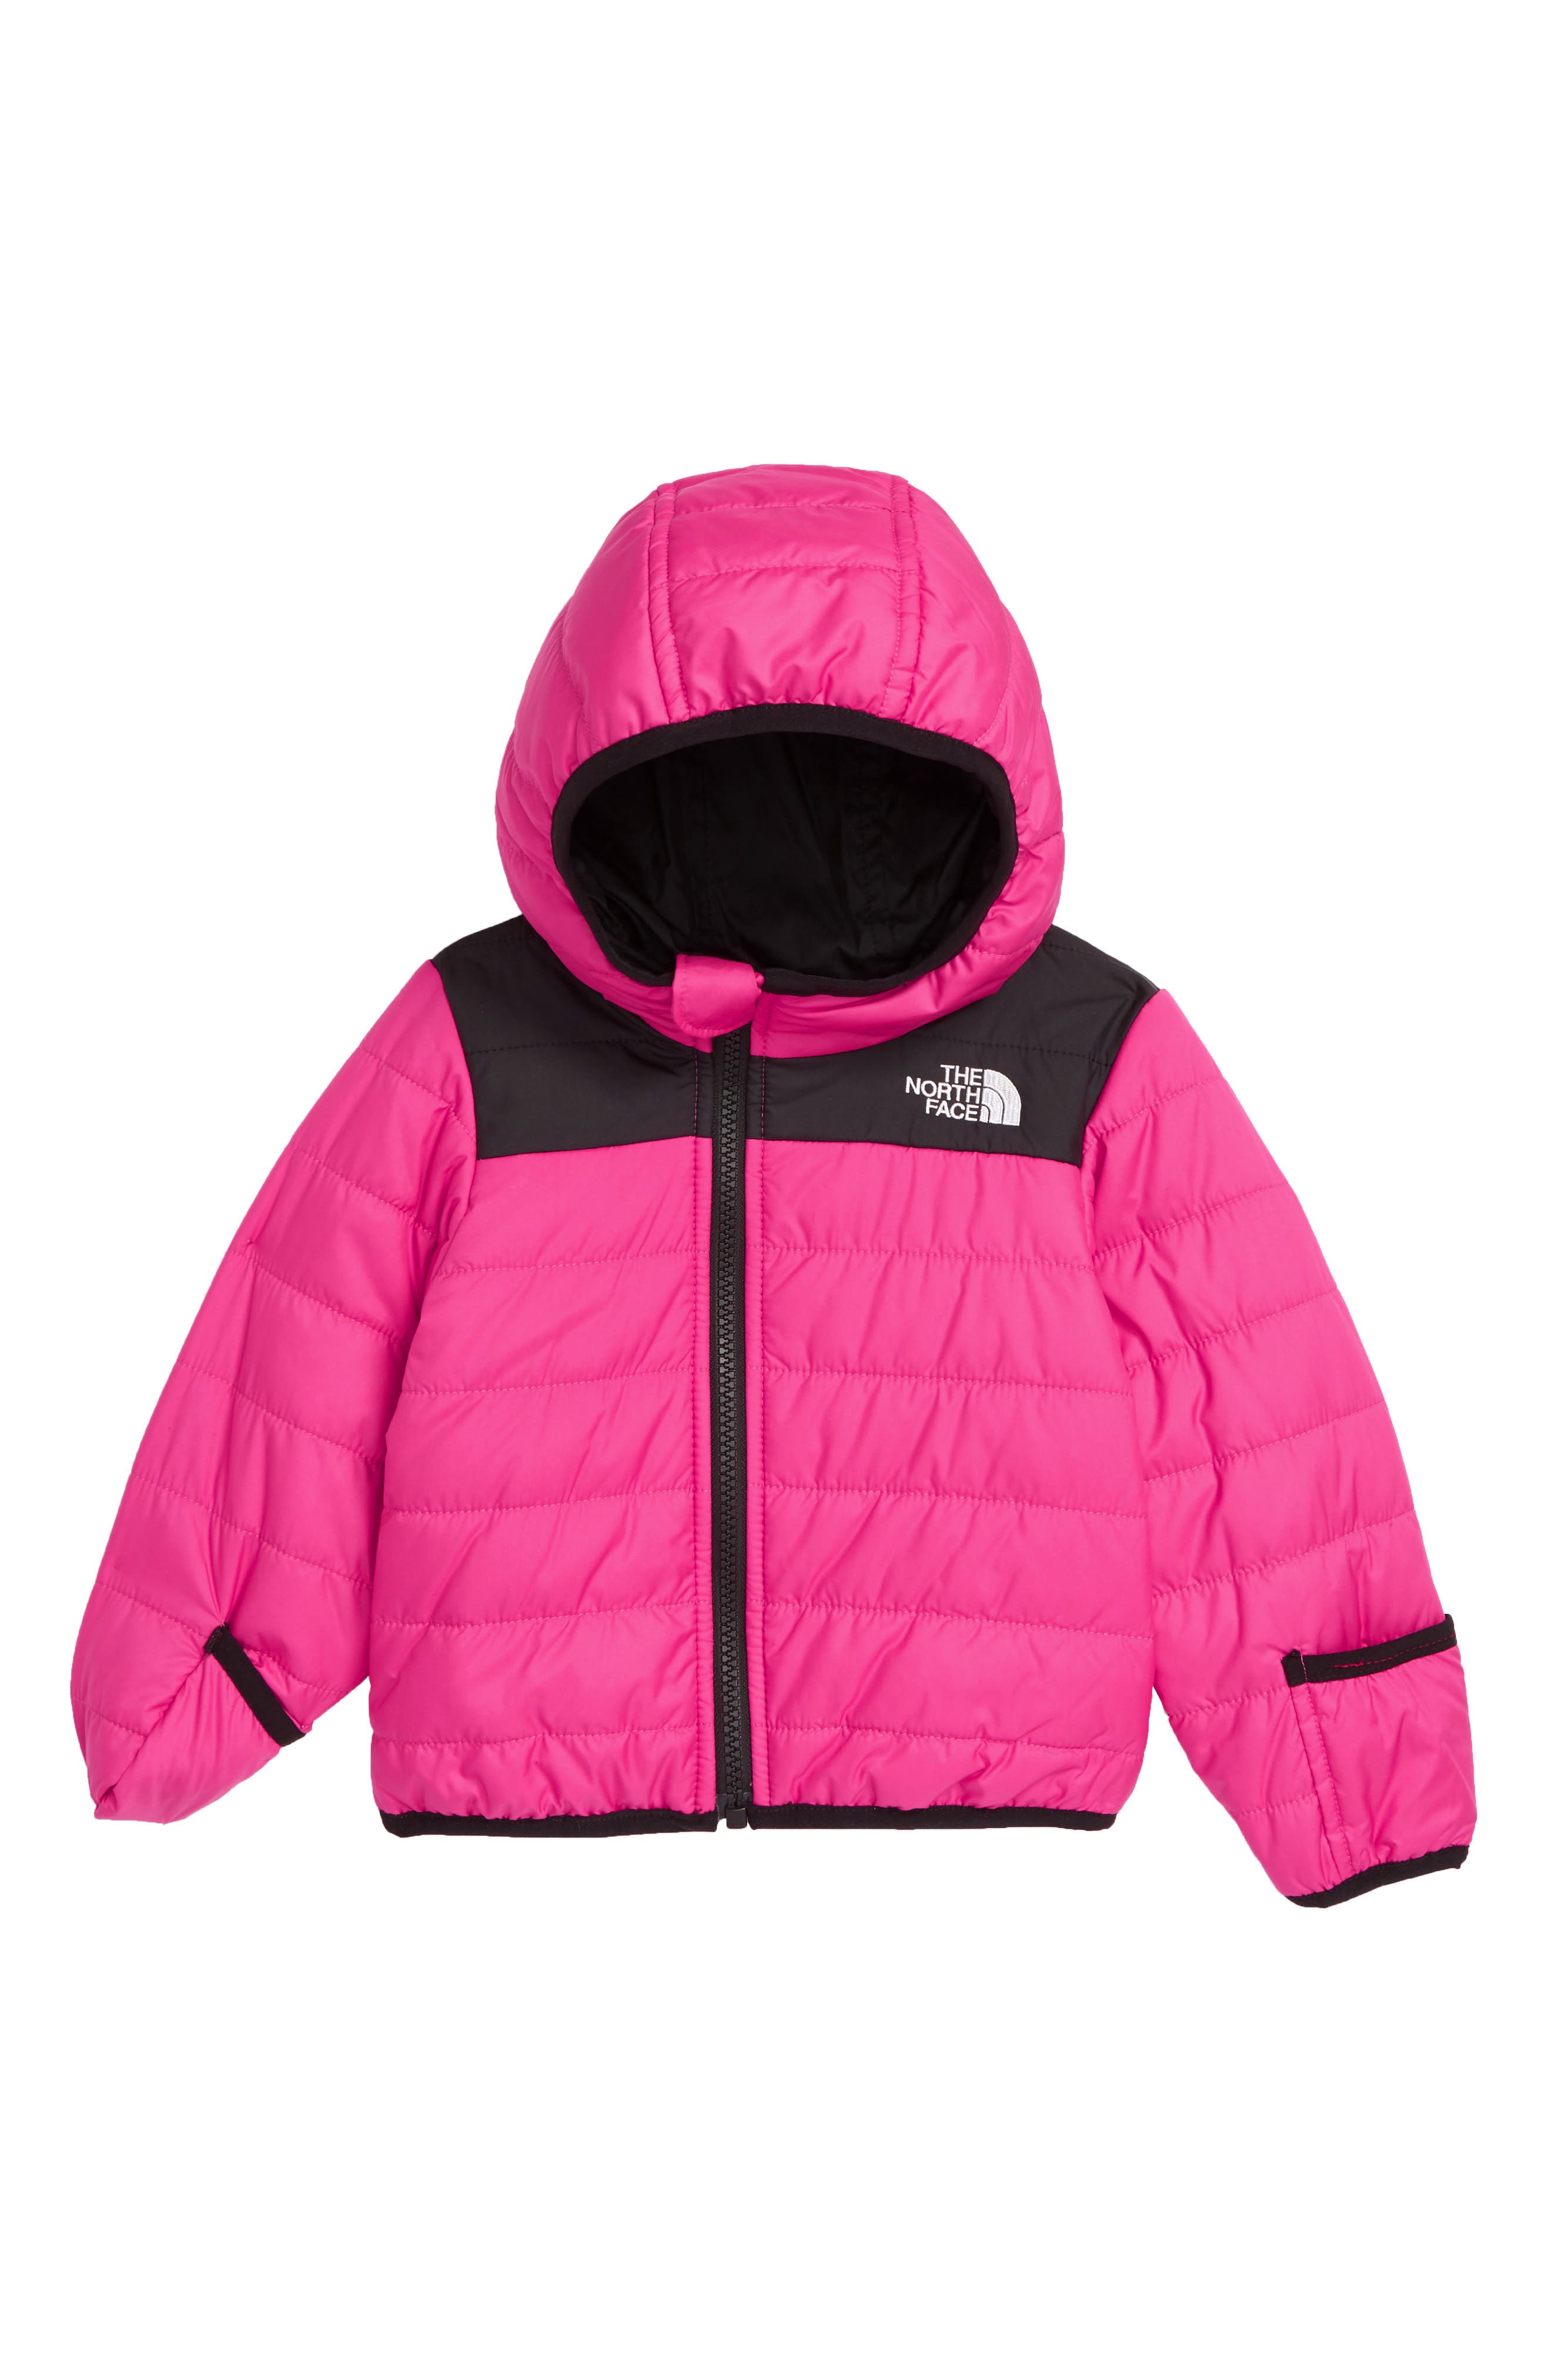 north face baby sweater